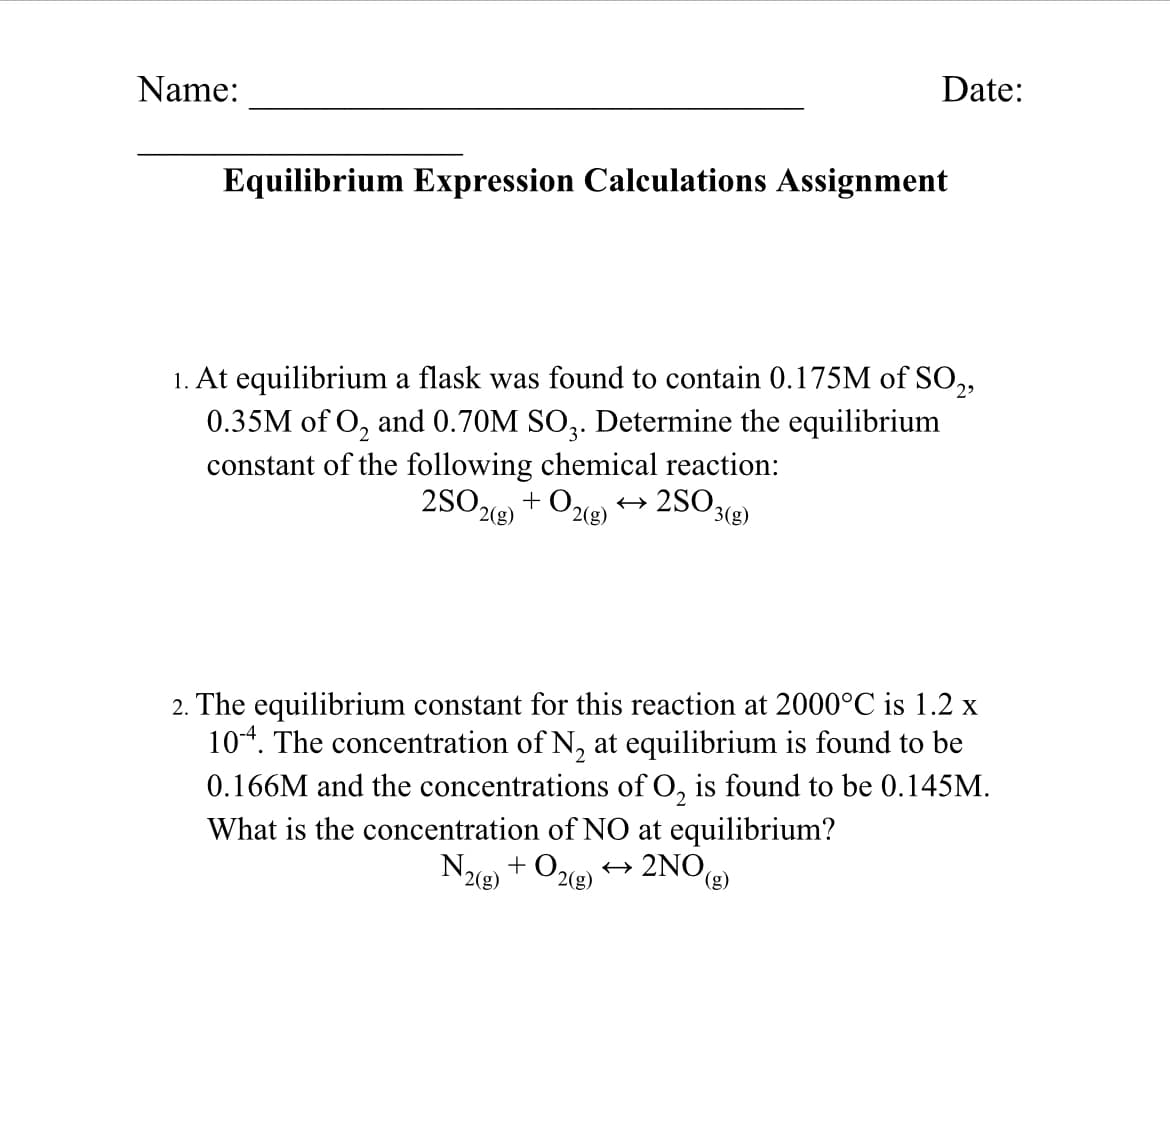 Date:
Name:
Equilibrium Expression Calculations Assignment
1. At equilibrium a flask was found to contain 0.175M of SO,,
0.35M of O, and 0.70M SO,. Determine the equilibrium
constant of the following chemical reaction:
2SO + Oe) → 2SO3(2)
2(g)
2(g)
2. The equilibrium constant for this reaction at 2000°C is 1.2 x
104. The concentration of N, at equilibrium is found to be
0.166M and the concentrations of O, is found to be 0.145M.
What is the concentration of NO at equilibrium?
+ 0,
N2(8)
+ 2NO,
2(g)
(g)
